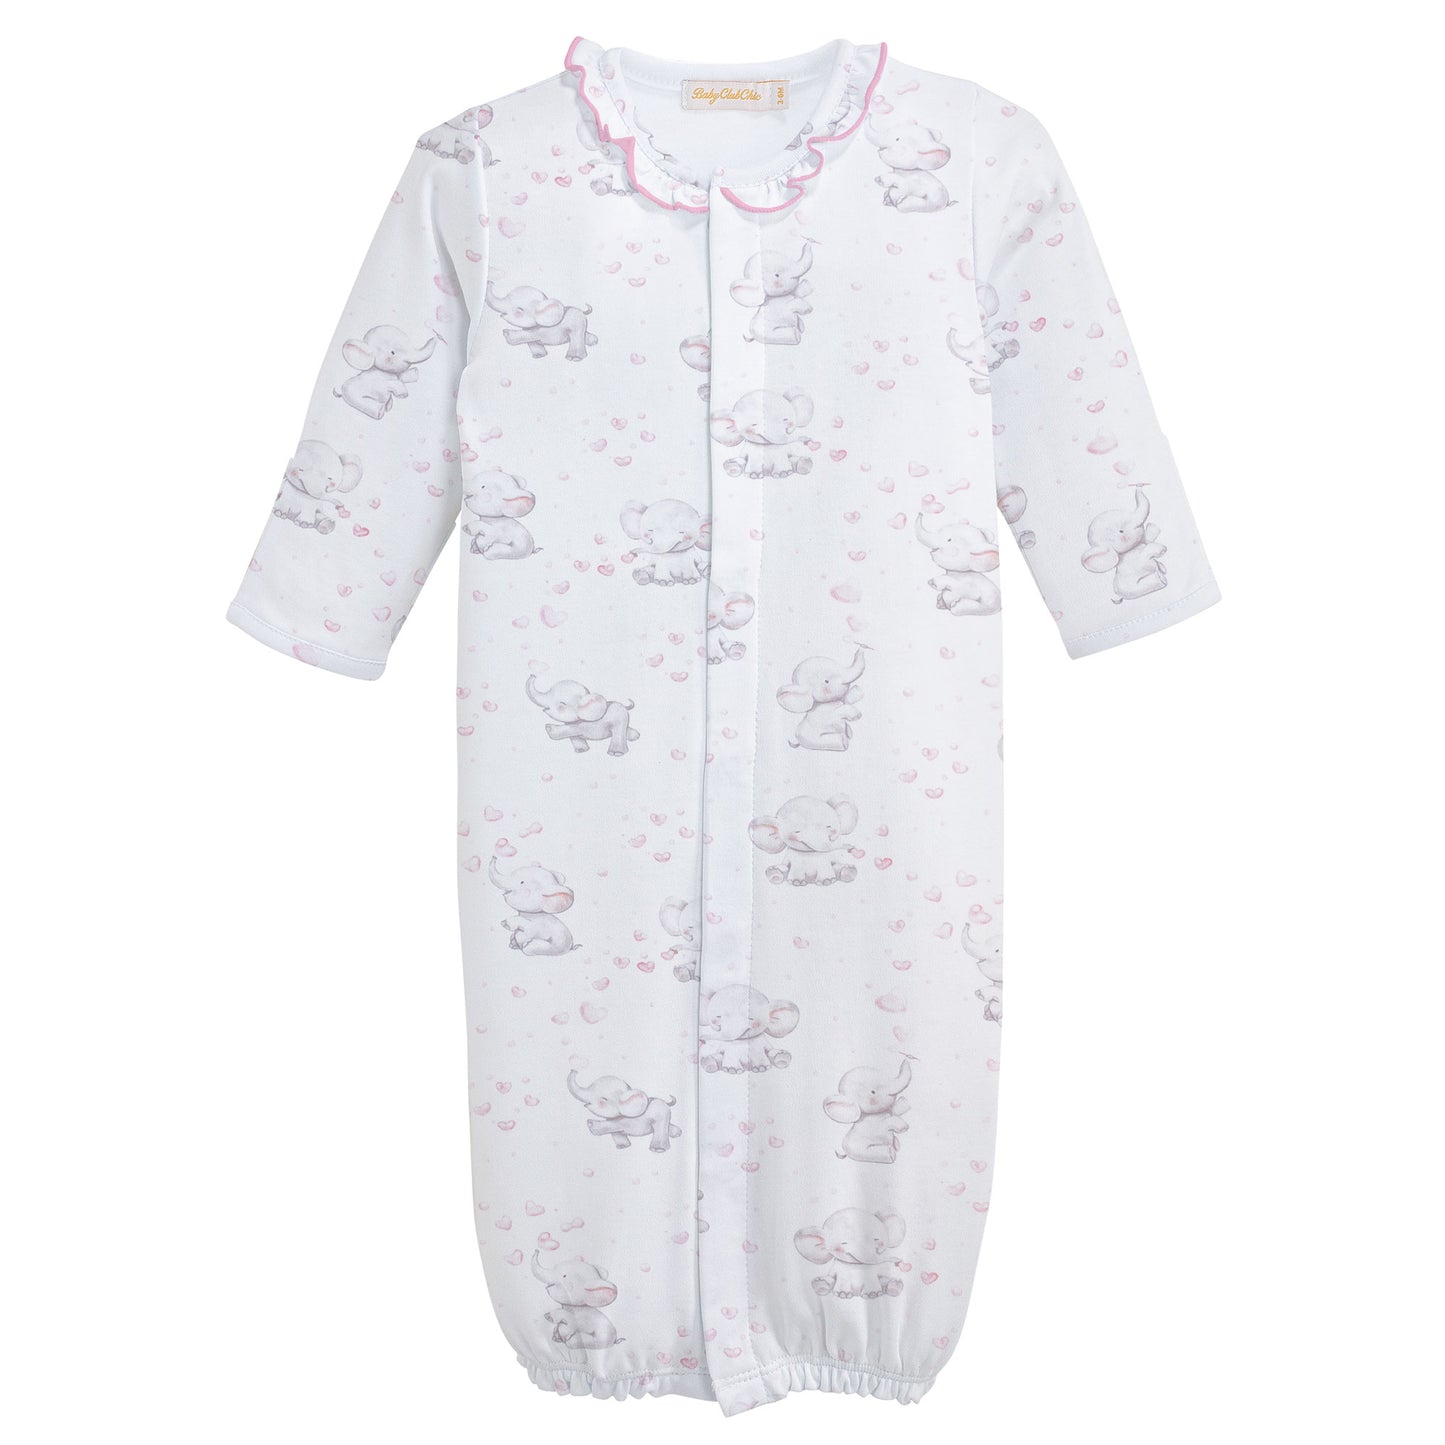 Girls Bubbly Elephant Converter Gown